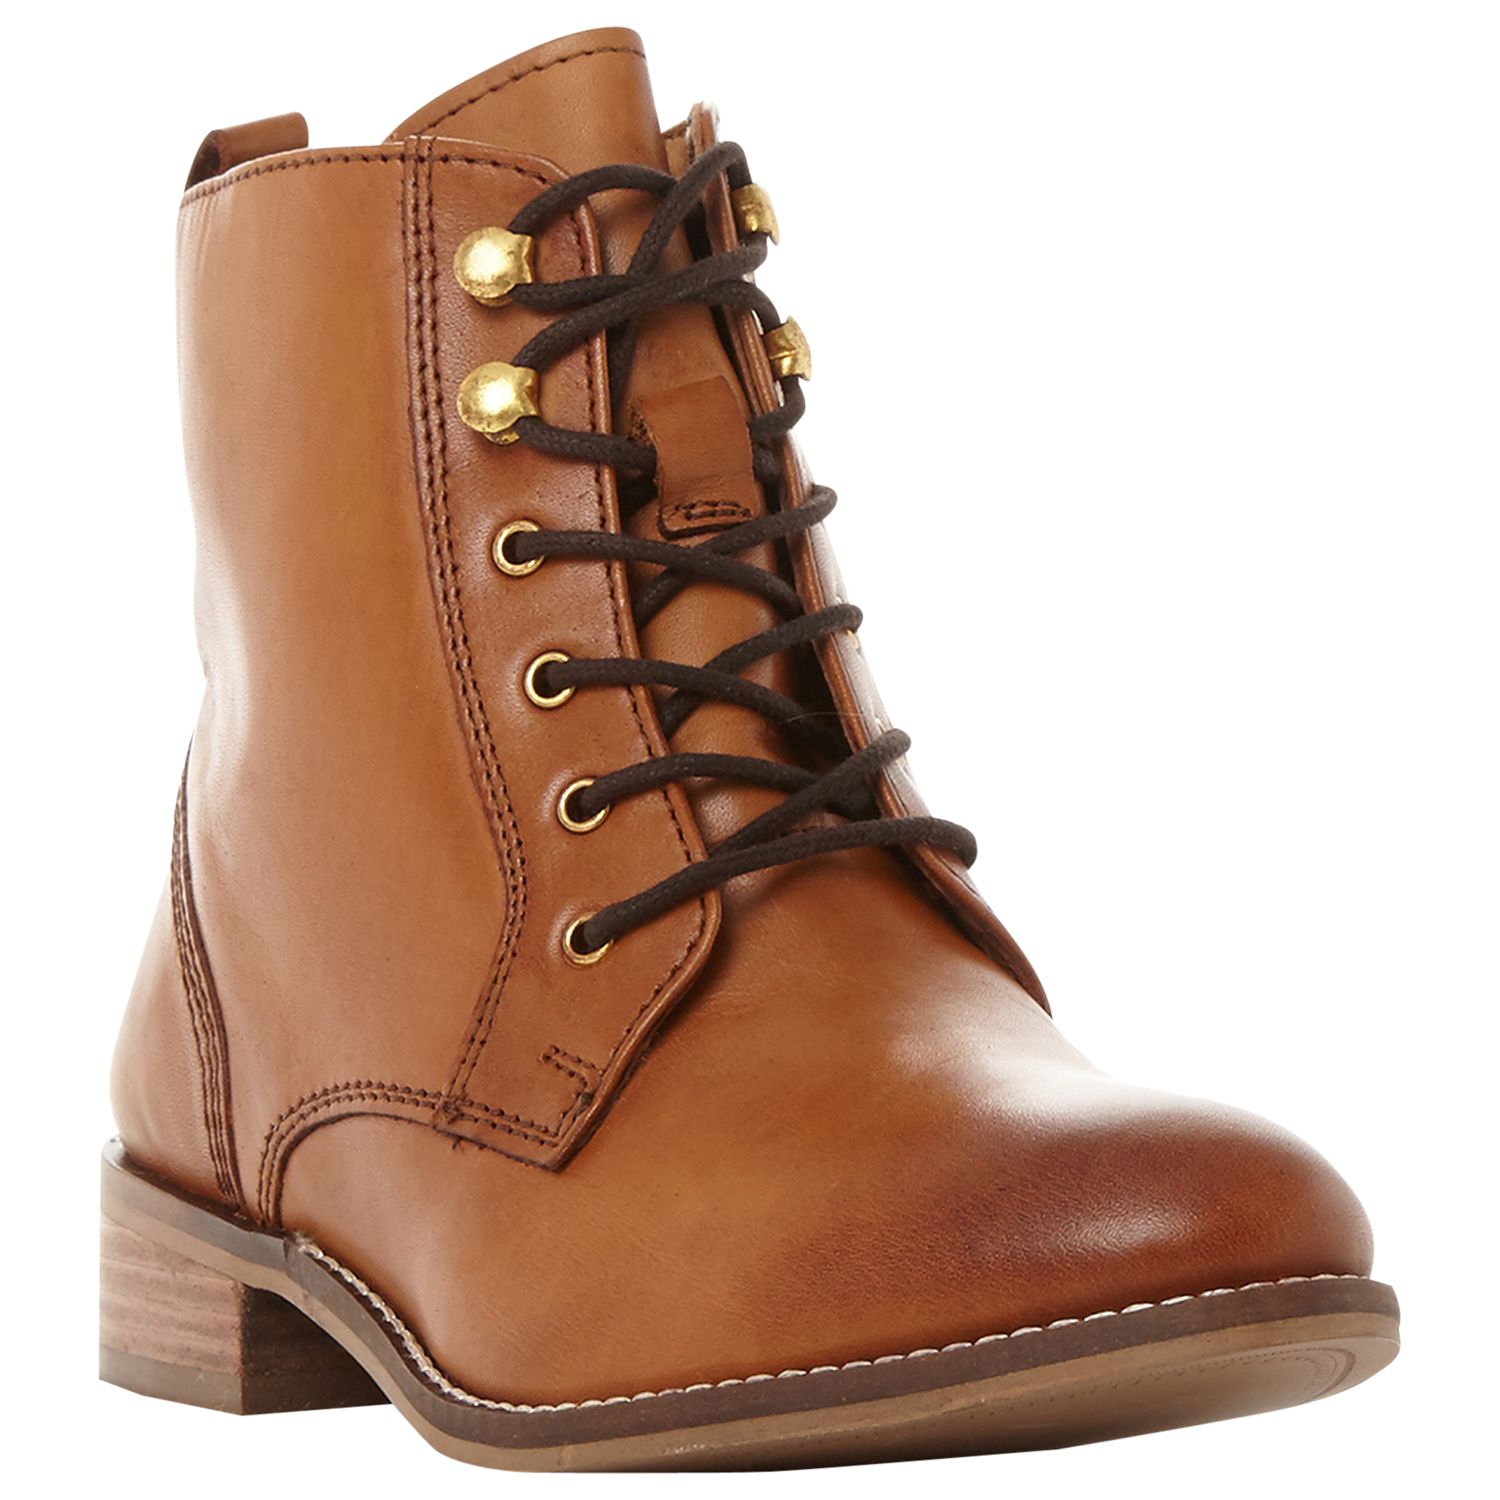 worm gebruiker Verbinding verbroken Dune Quincey Lace Up Ankle Boots, Tan Leather